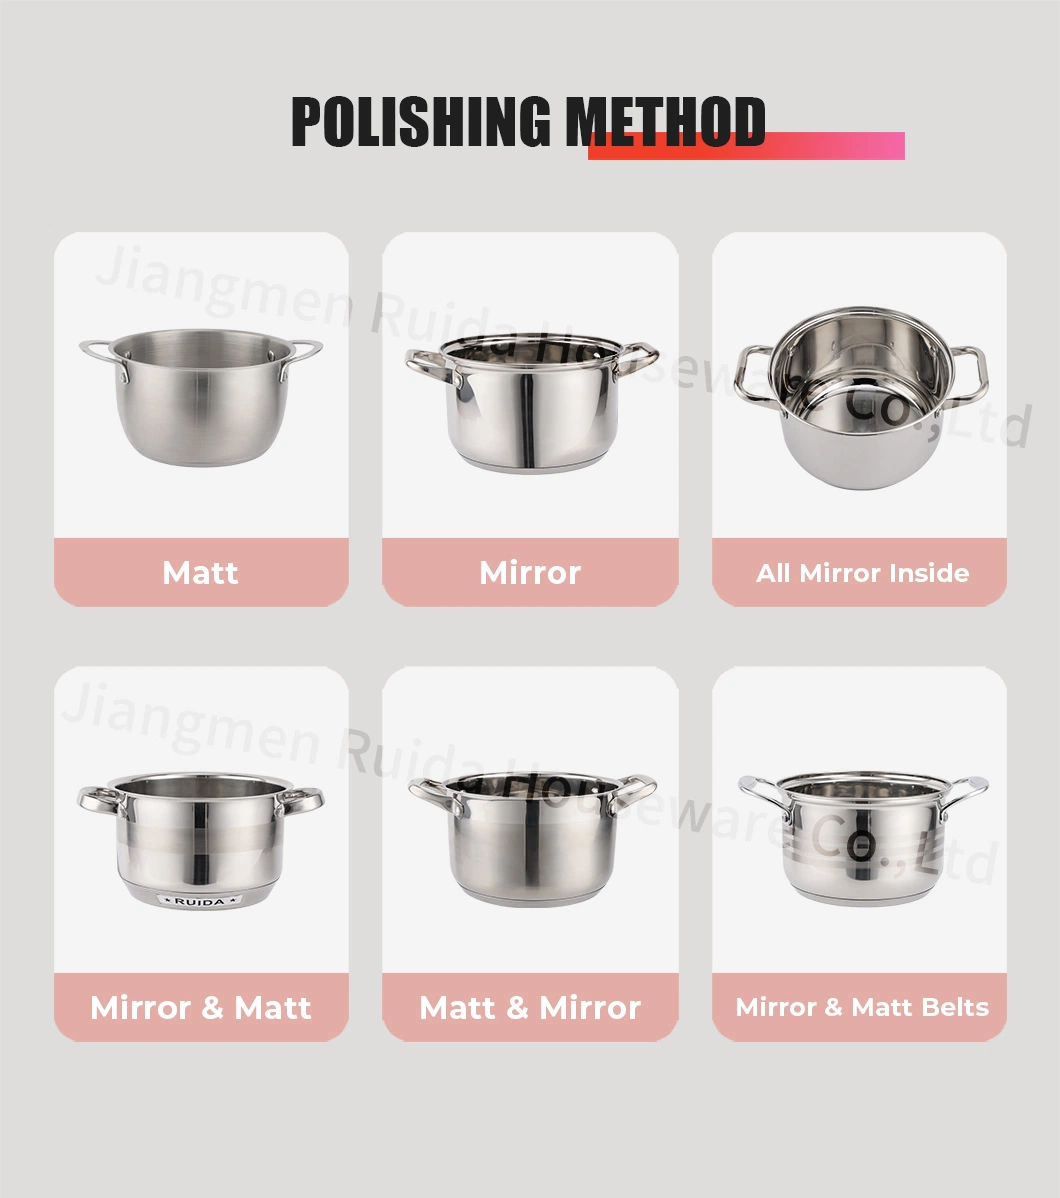 8PCS Stainless Steel Cookware Sets Cooking Pot Cokware Kitchenware Nonstick Cookware Set